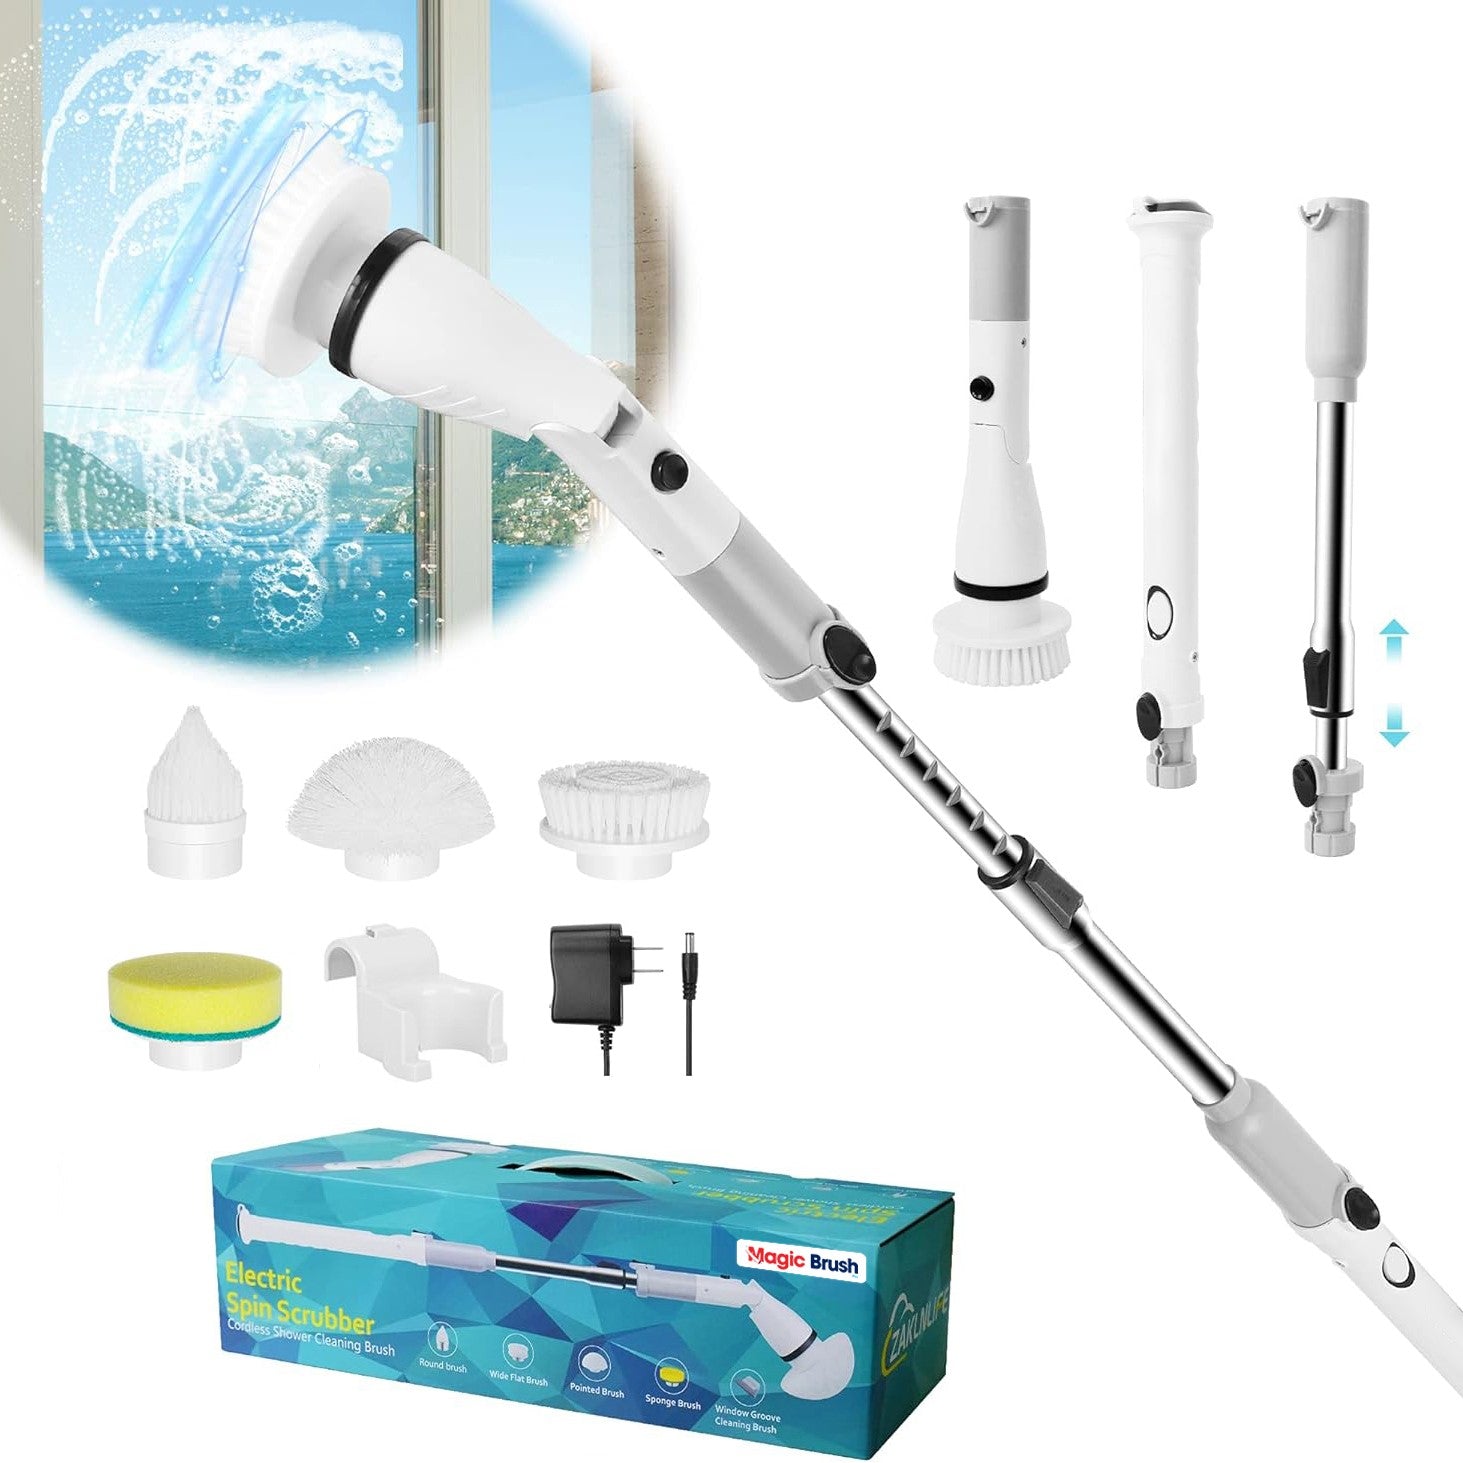 Magic Brush: Electric Cleaning Scrubber